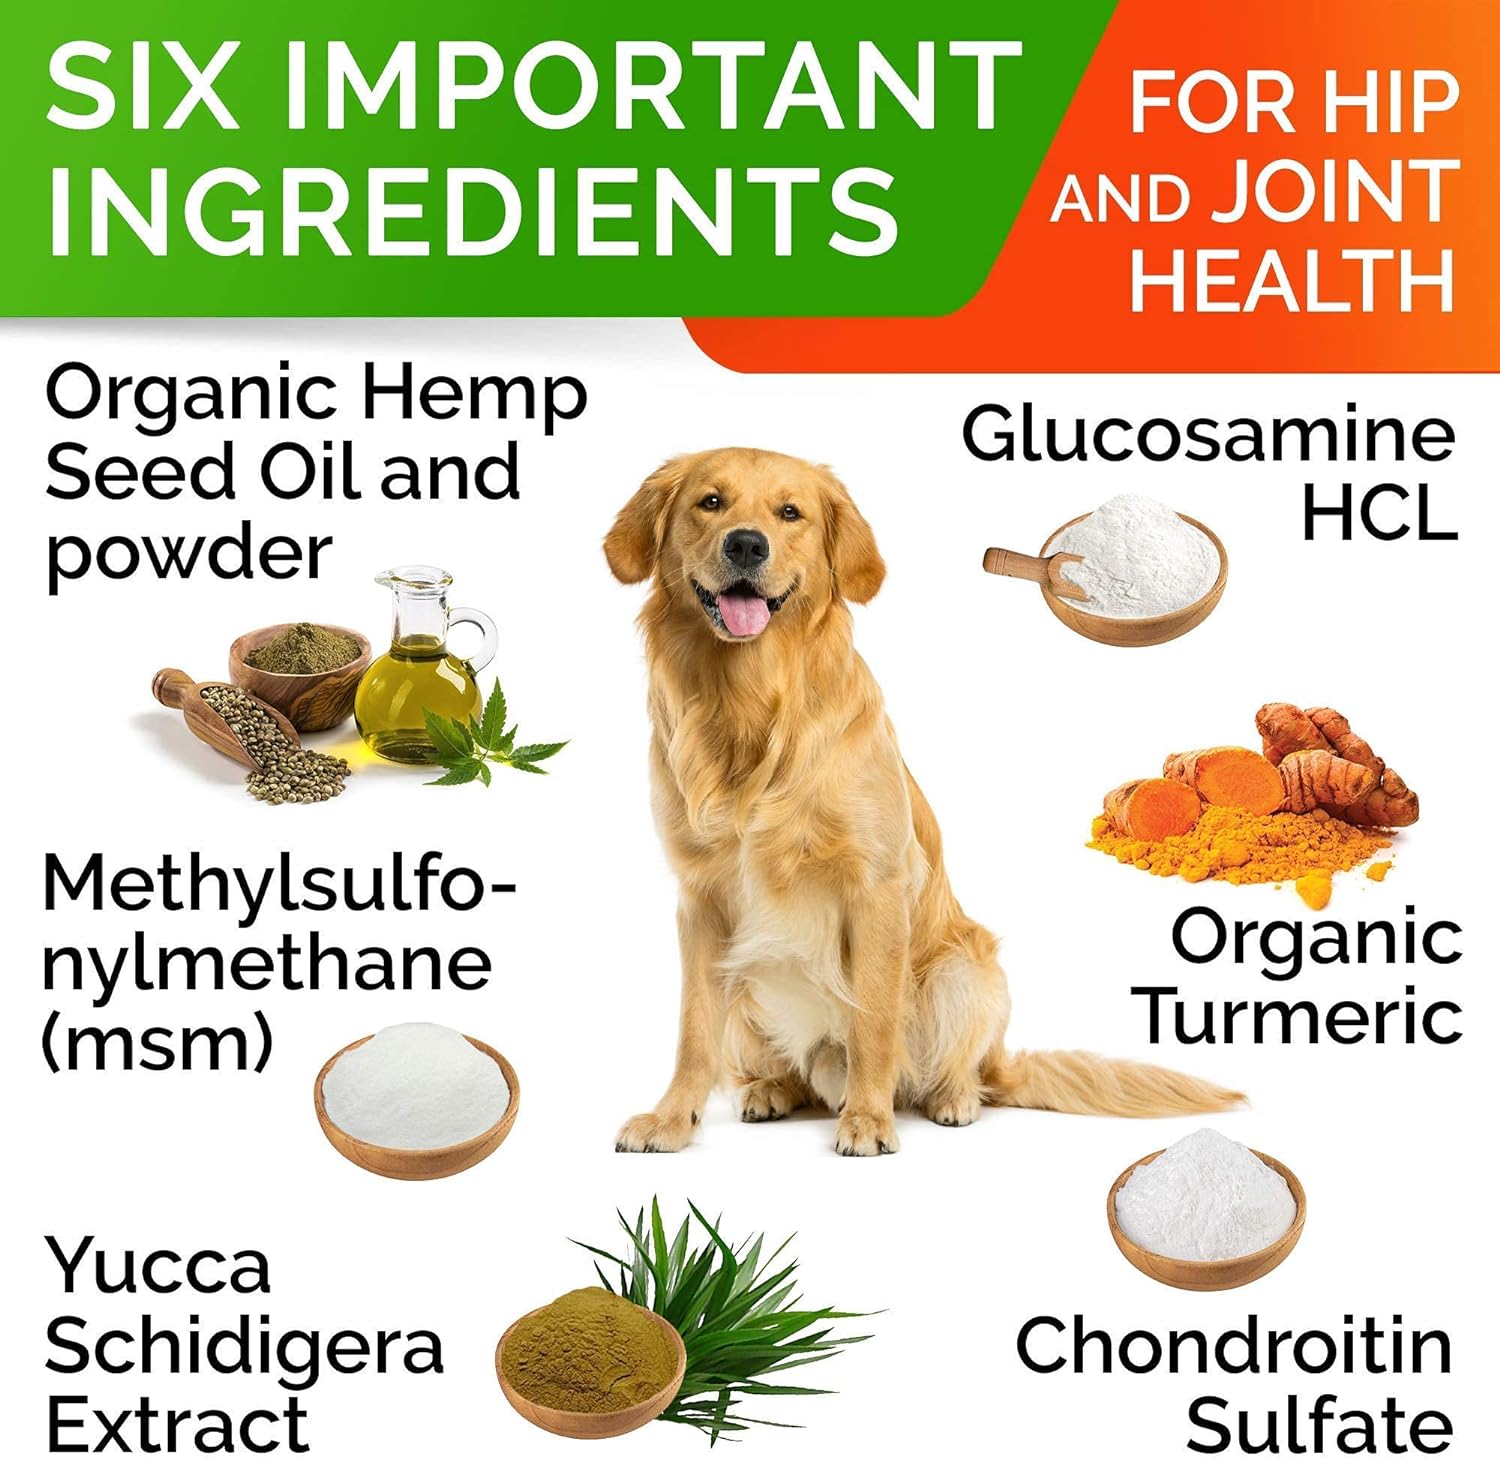 Hemp Chews for Dogs - Glucosamine Chondroitin for Dogs Joint Pain Relief with Hemp Oil, Hip & Joint Supplement Dogs, MSM Turmeric for Dogs Mobility, Dog Joint Supplement, Hemp Dog Treats Joints Health : Pet Supplies